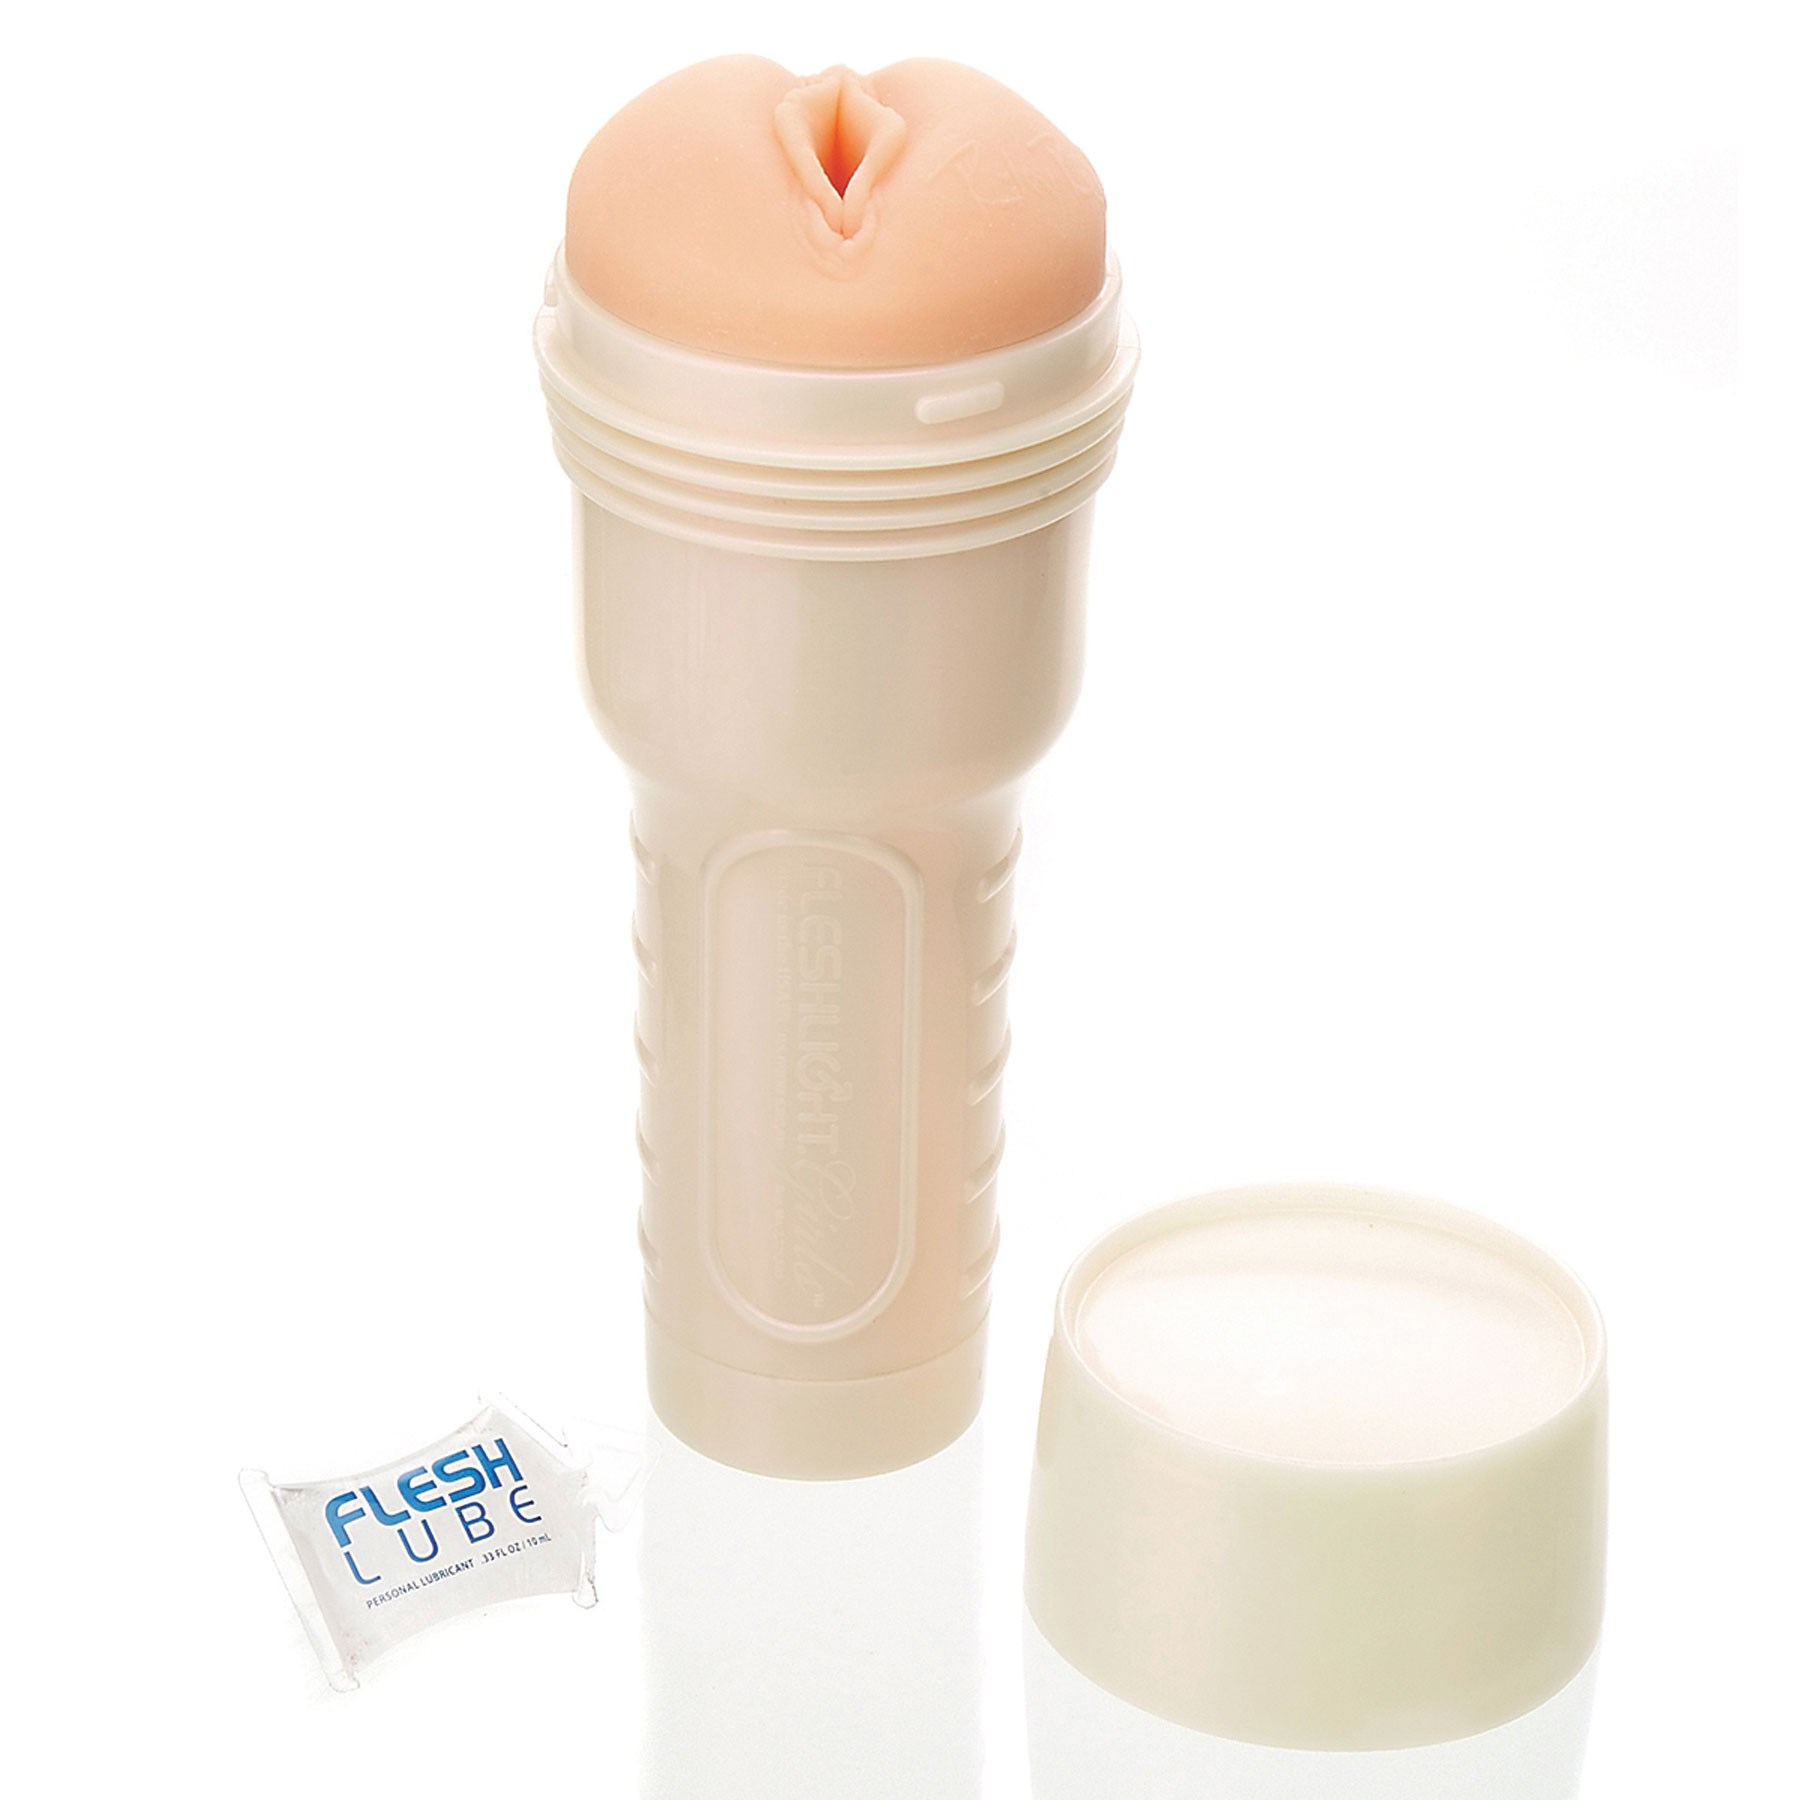 Fleshlight: Riley Reid storker with cap and lube sample